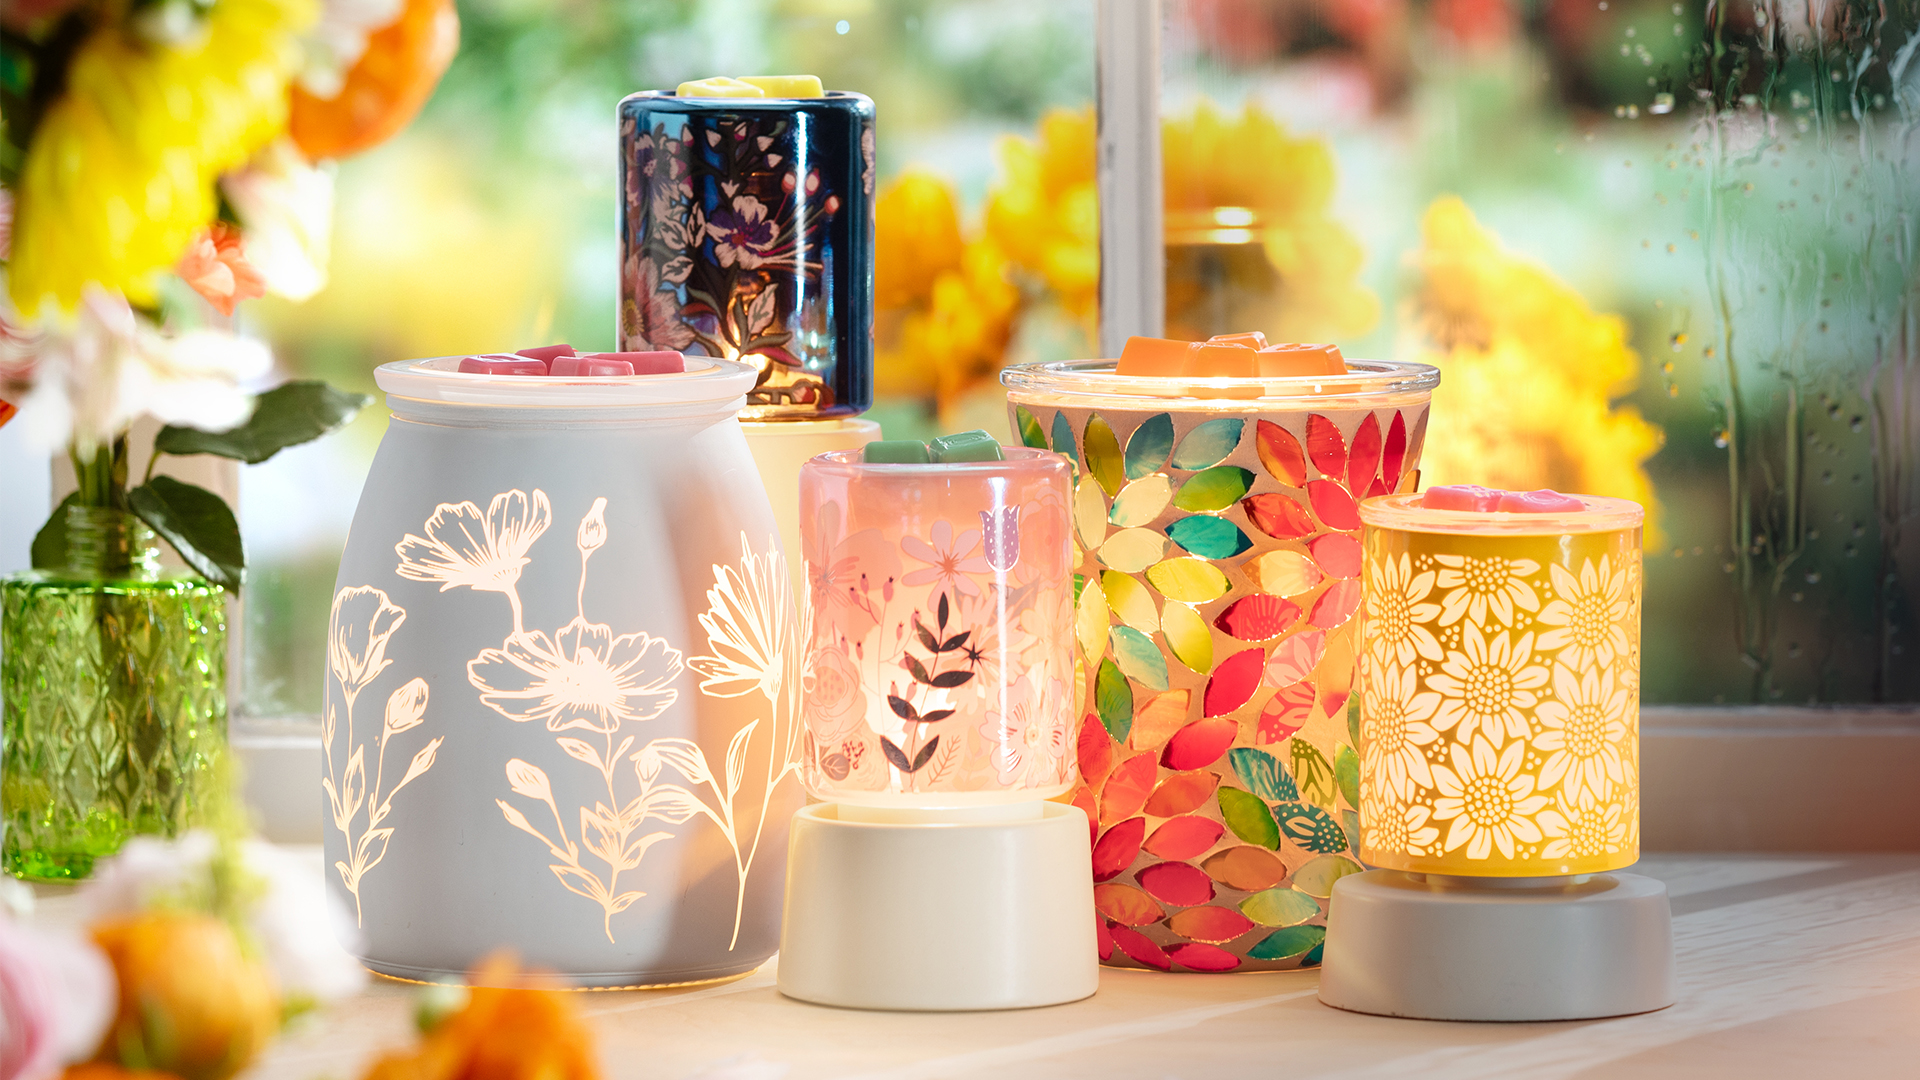 Five May flowers that inspired Scentsy fragrances